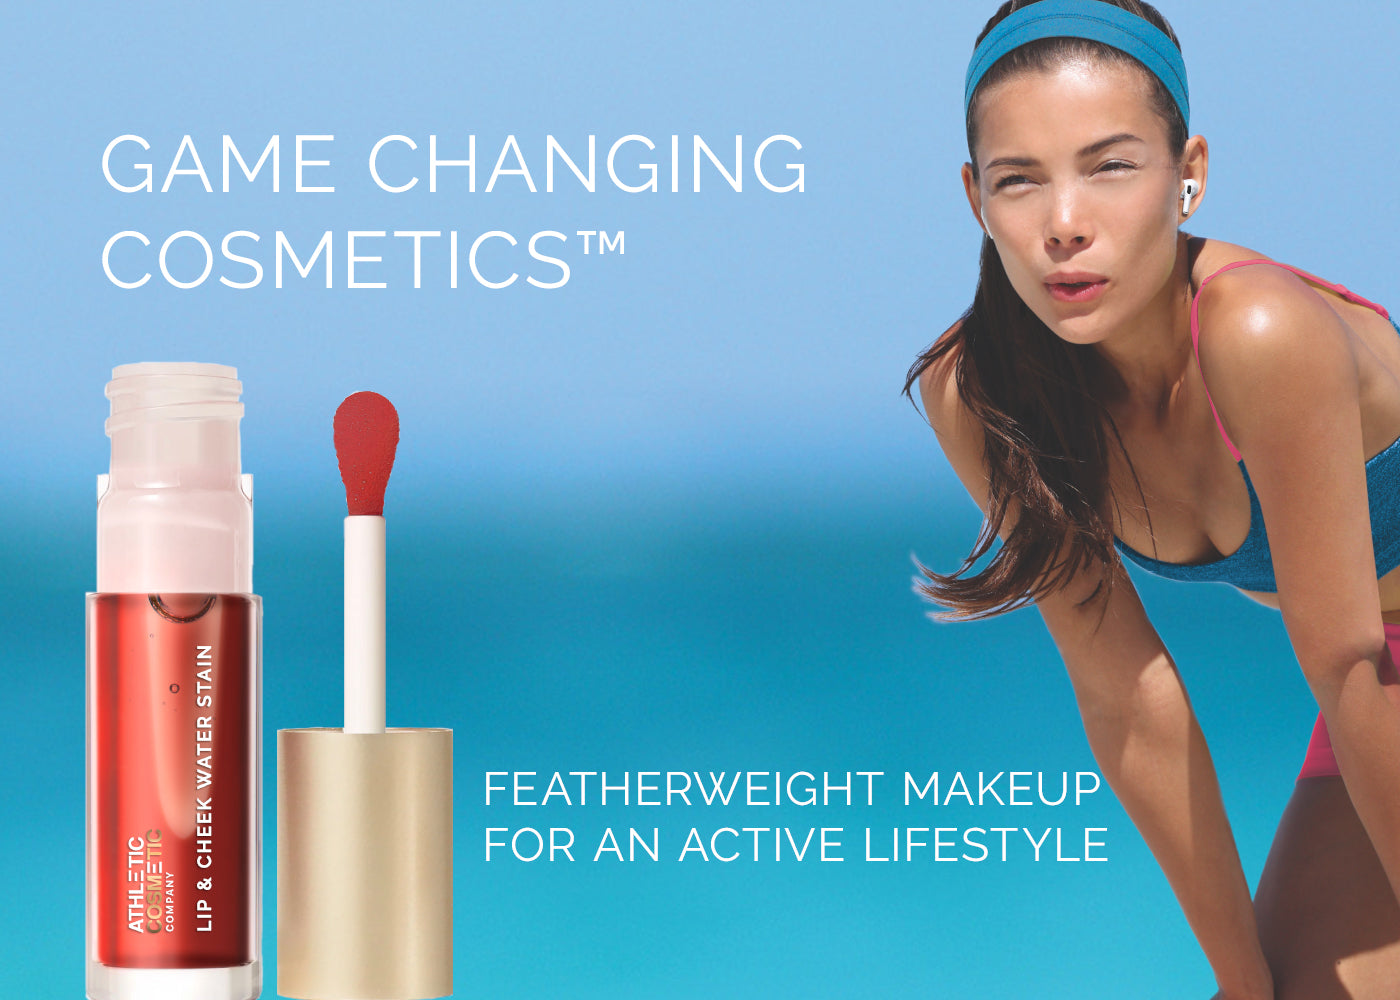 GAME CHANGING COSMETICS™. FEATHERWEIGHT MAKEUP FOR AN ACTIVE LIFESTYLE